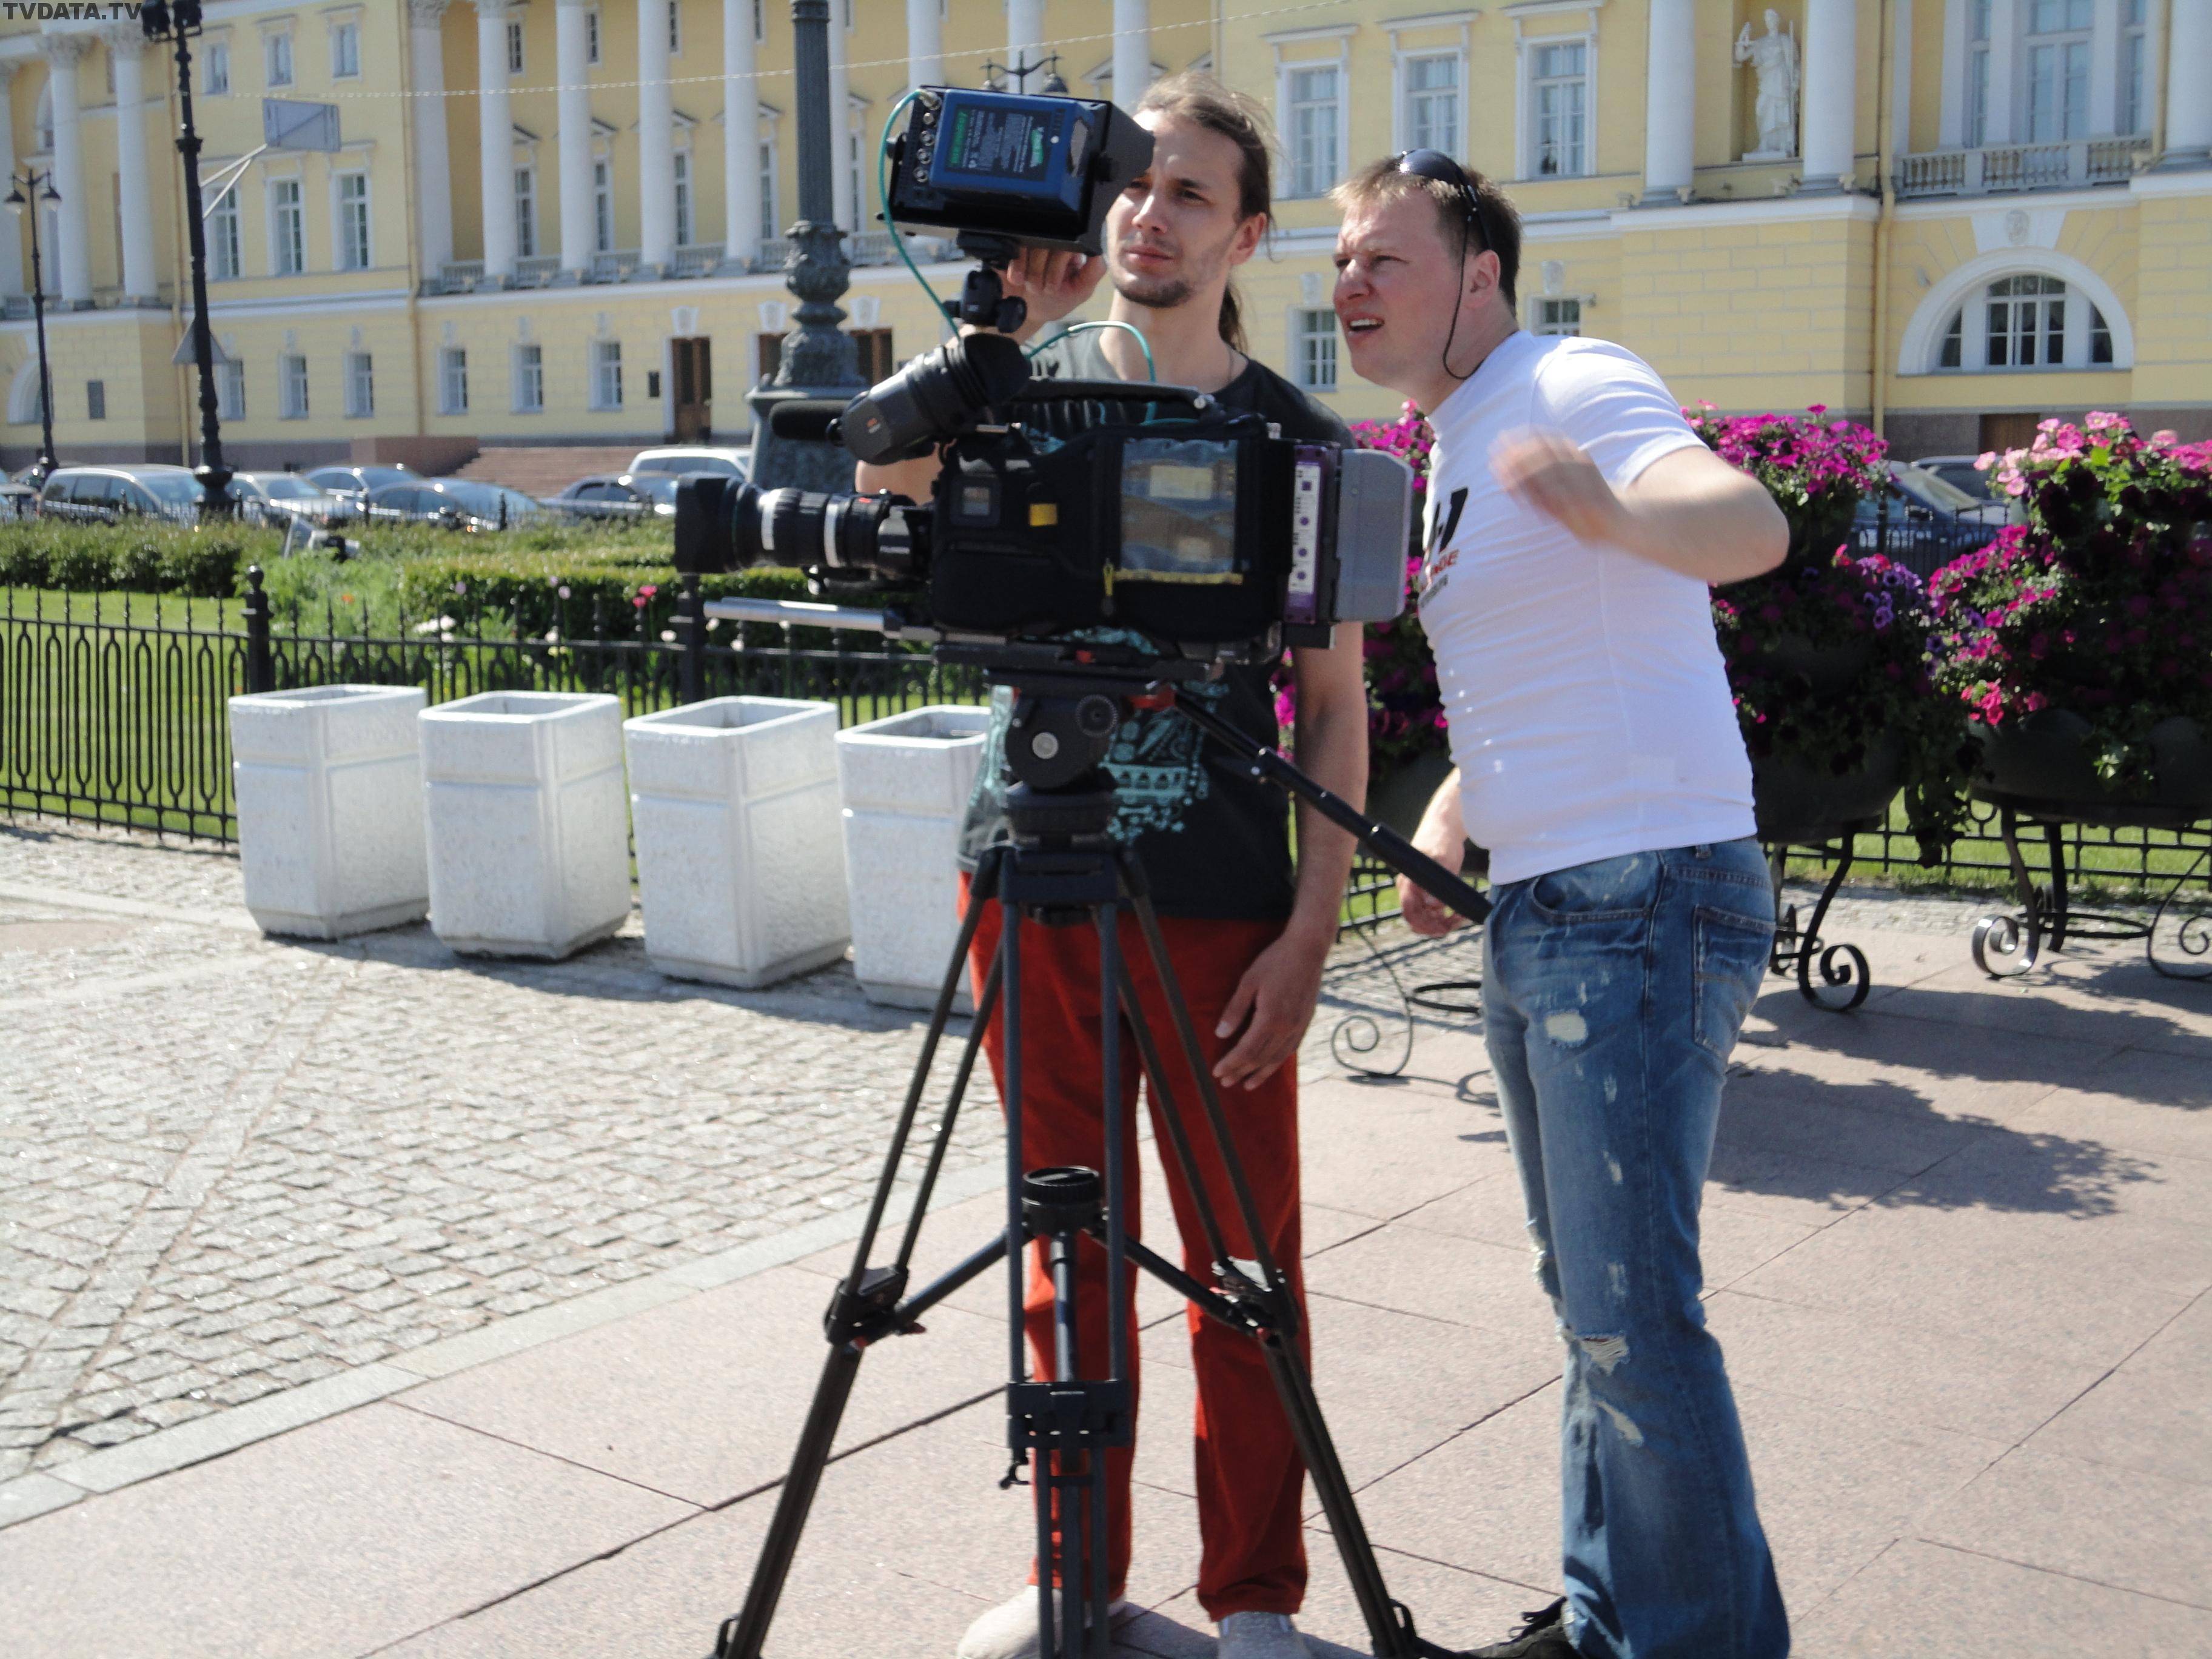 Filming on Isaakievskaya Square which stretches between St. Isaac's Cathedral and the Mariinsky Palace in St. Petersburg